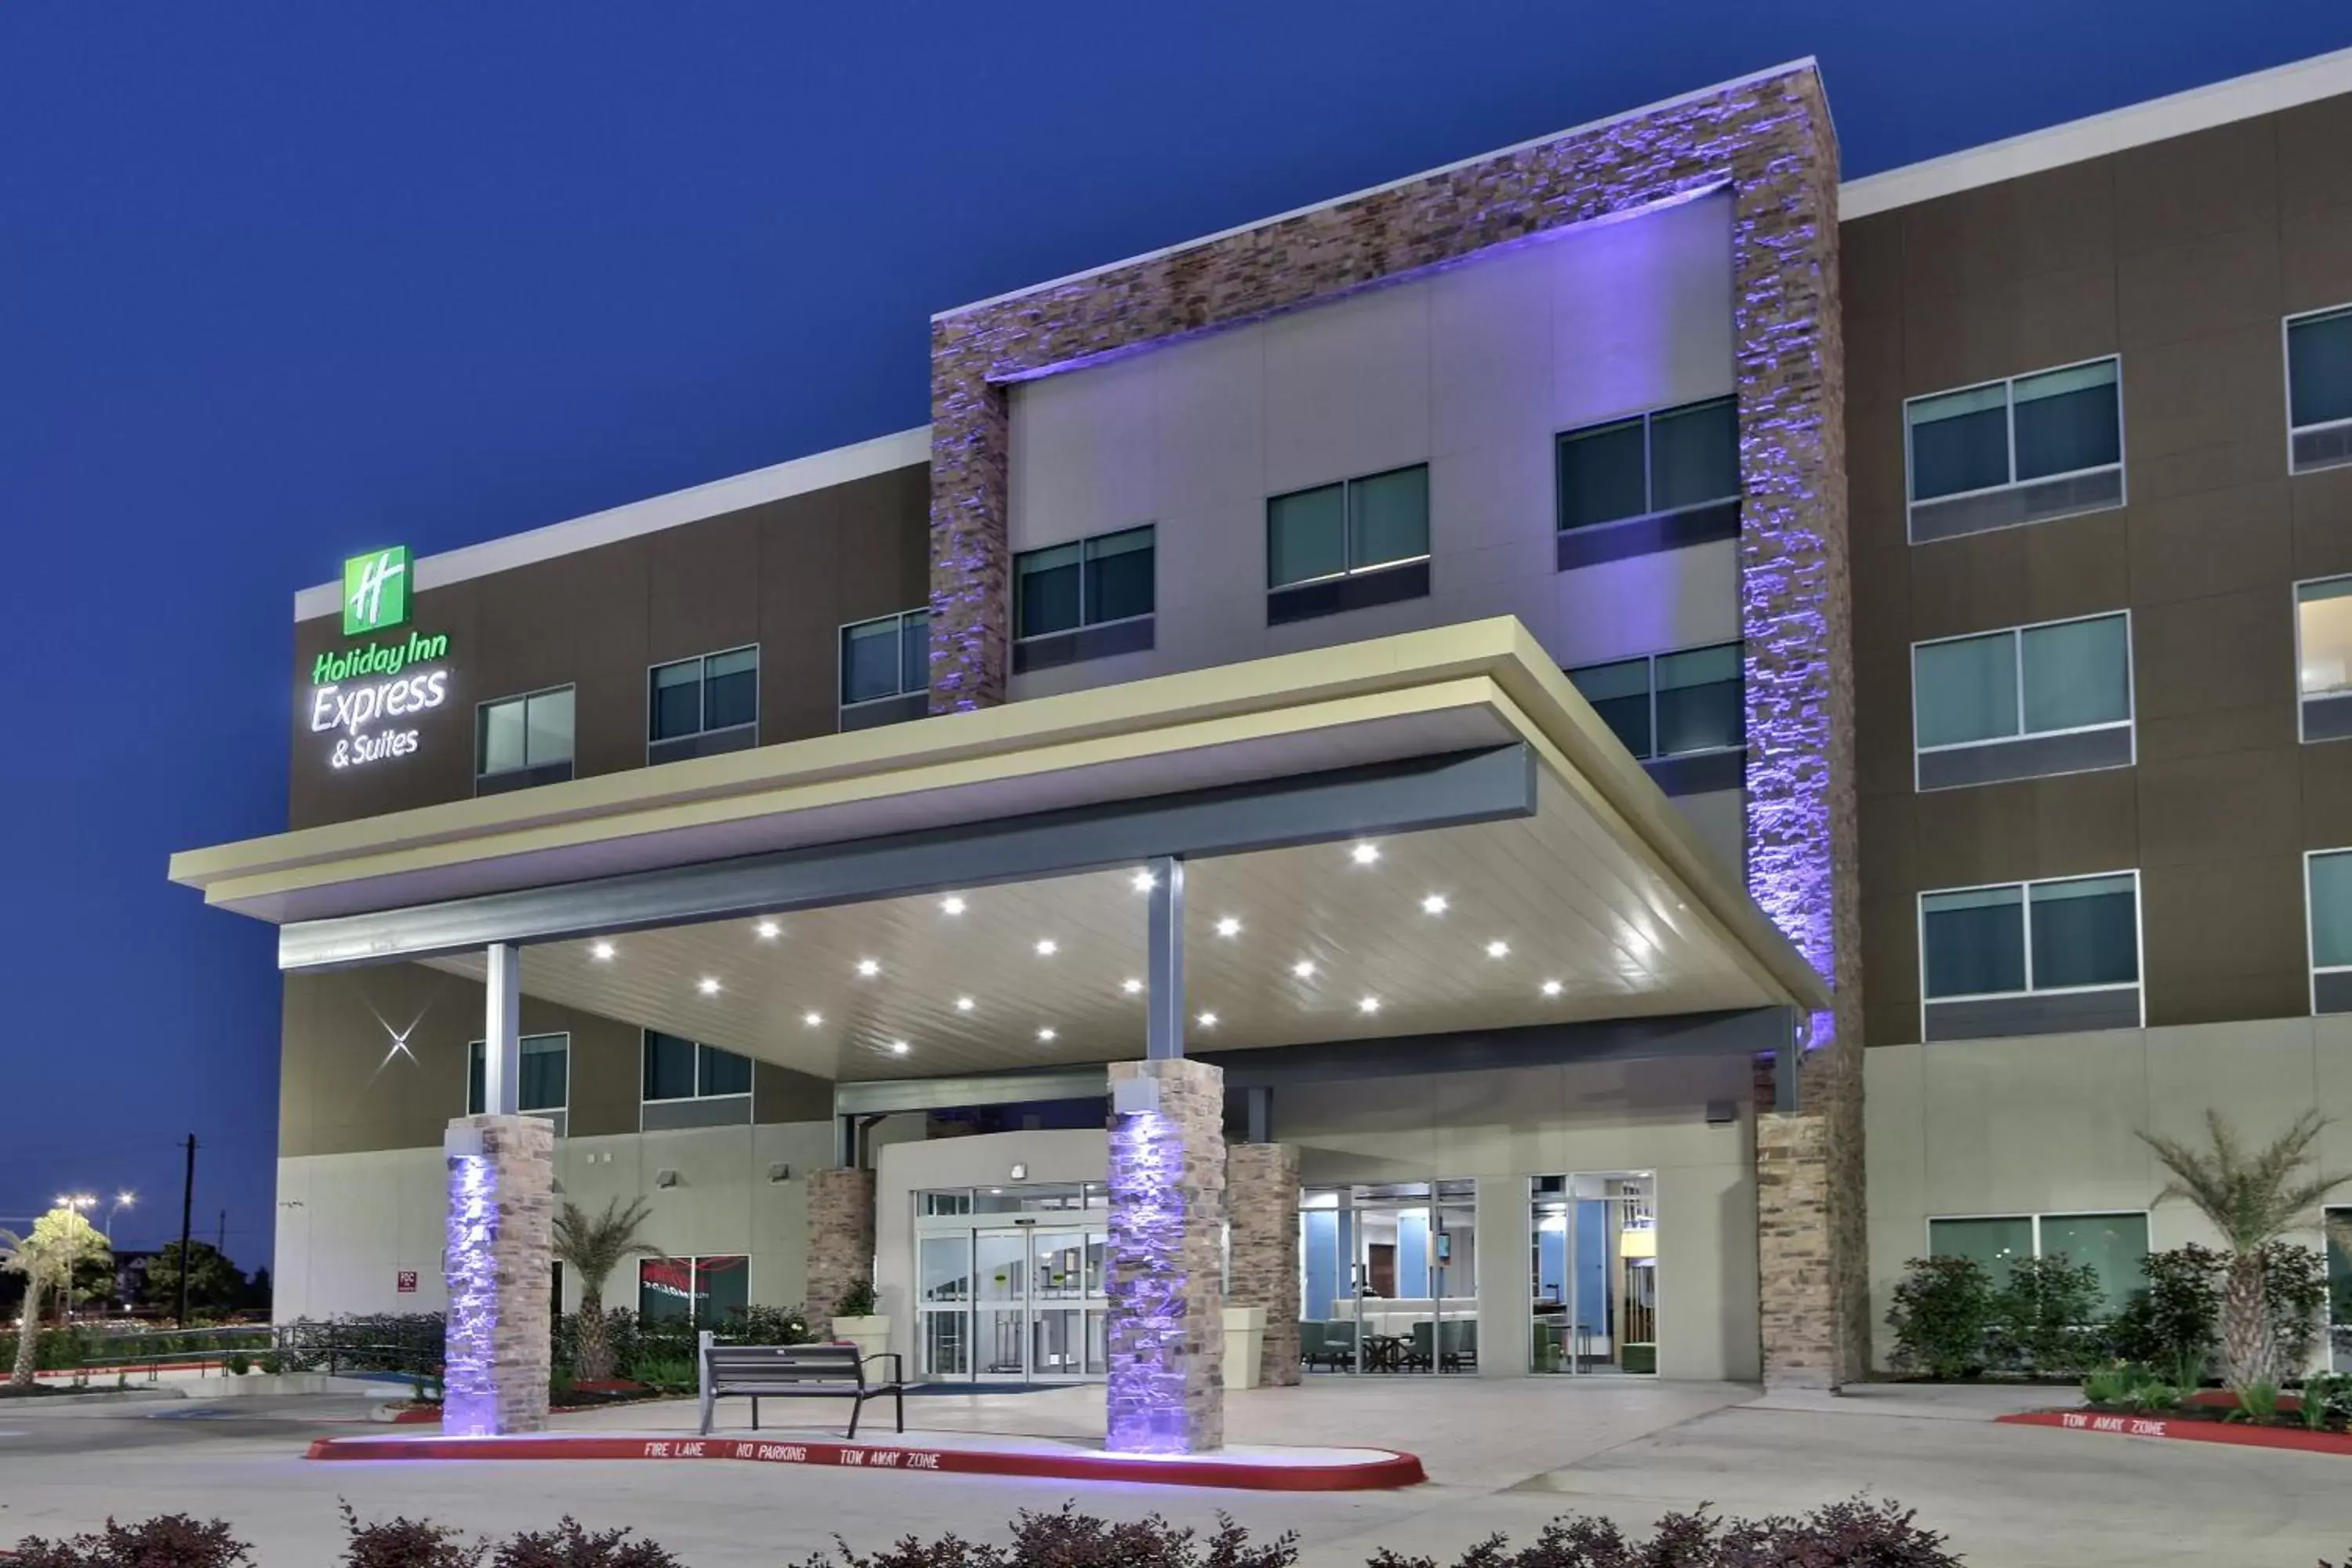 Property Building in Holiday Inn Express & Suites - Houston East - Beltway 8, an IHG Hotel